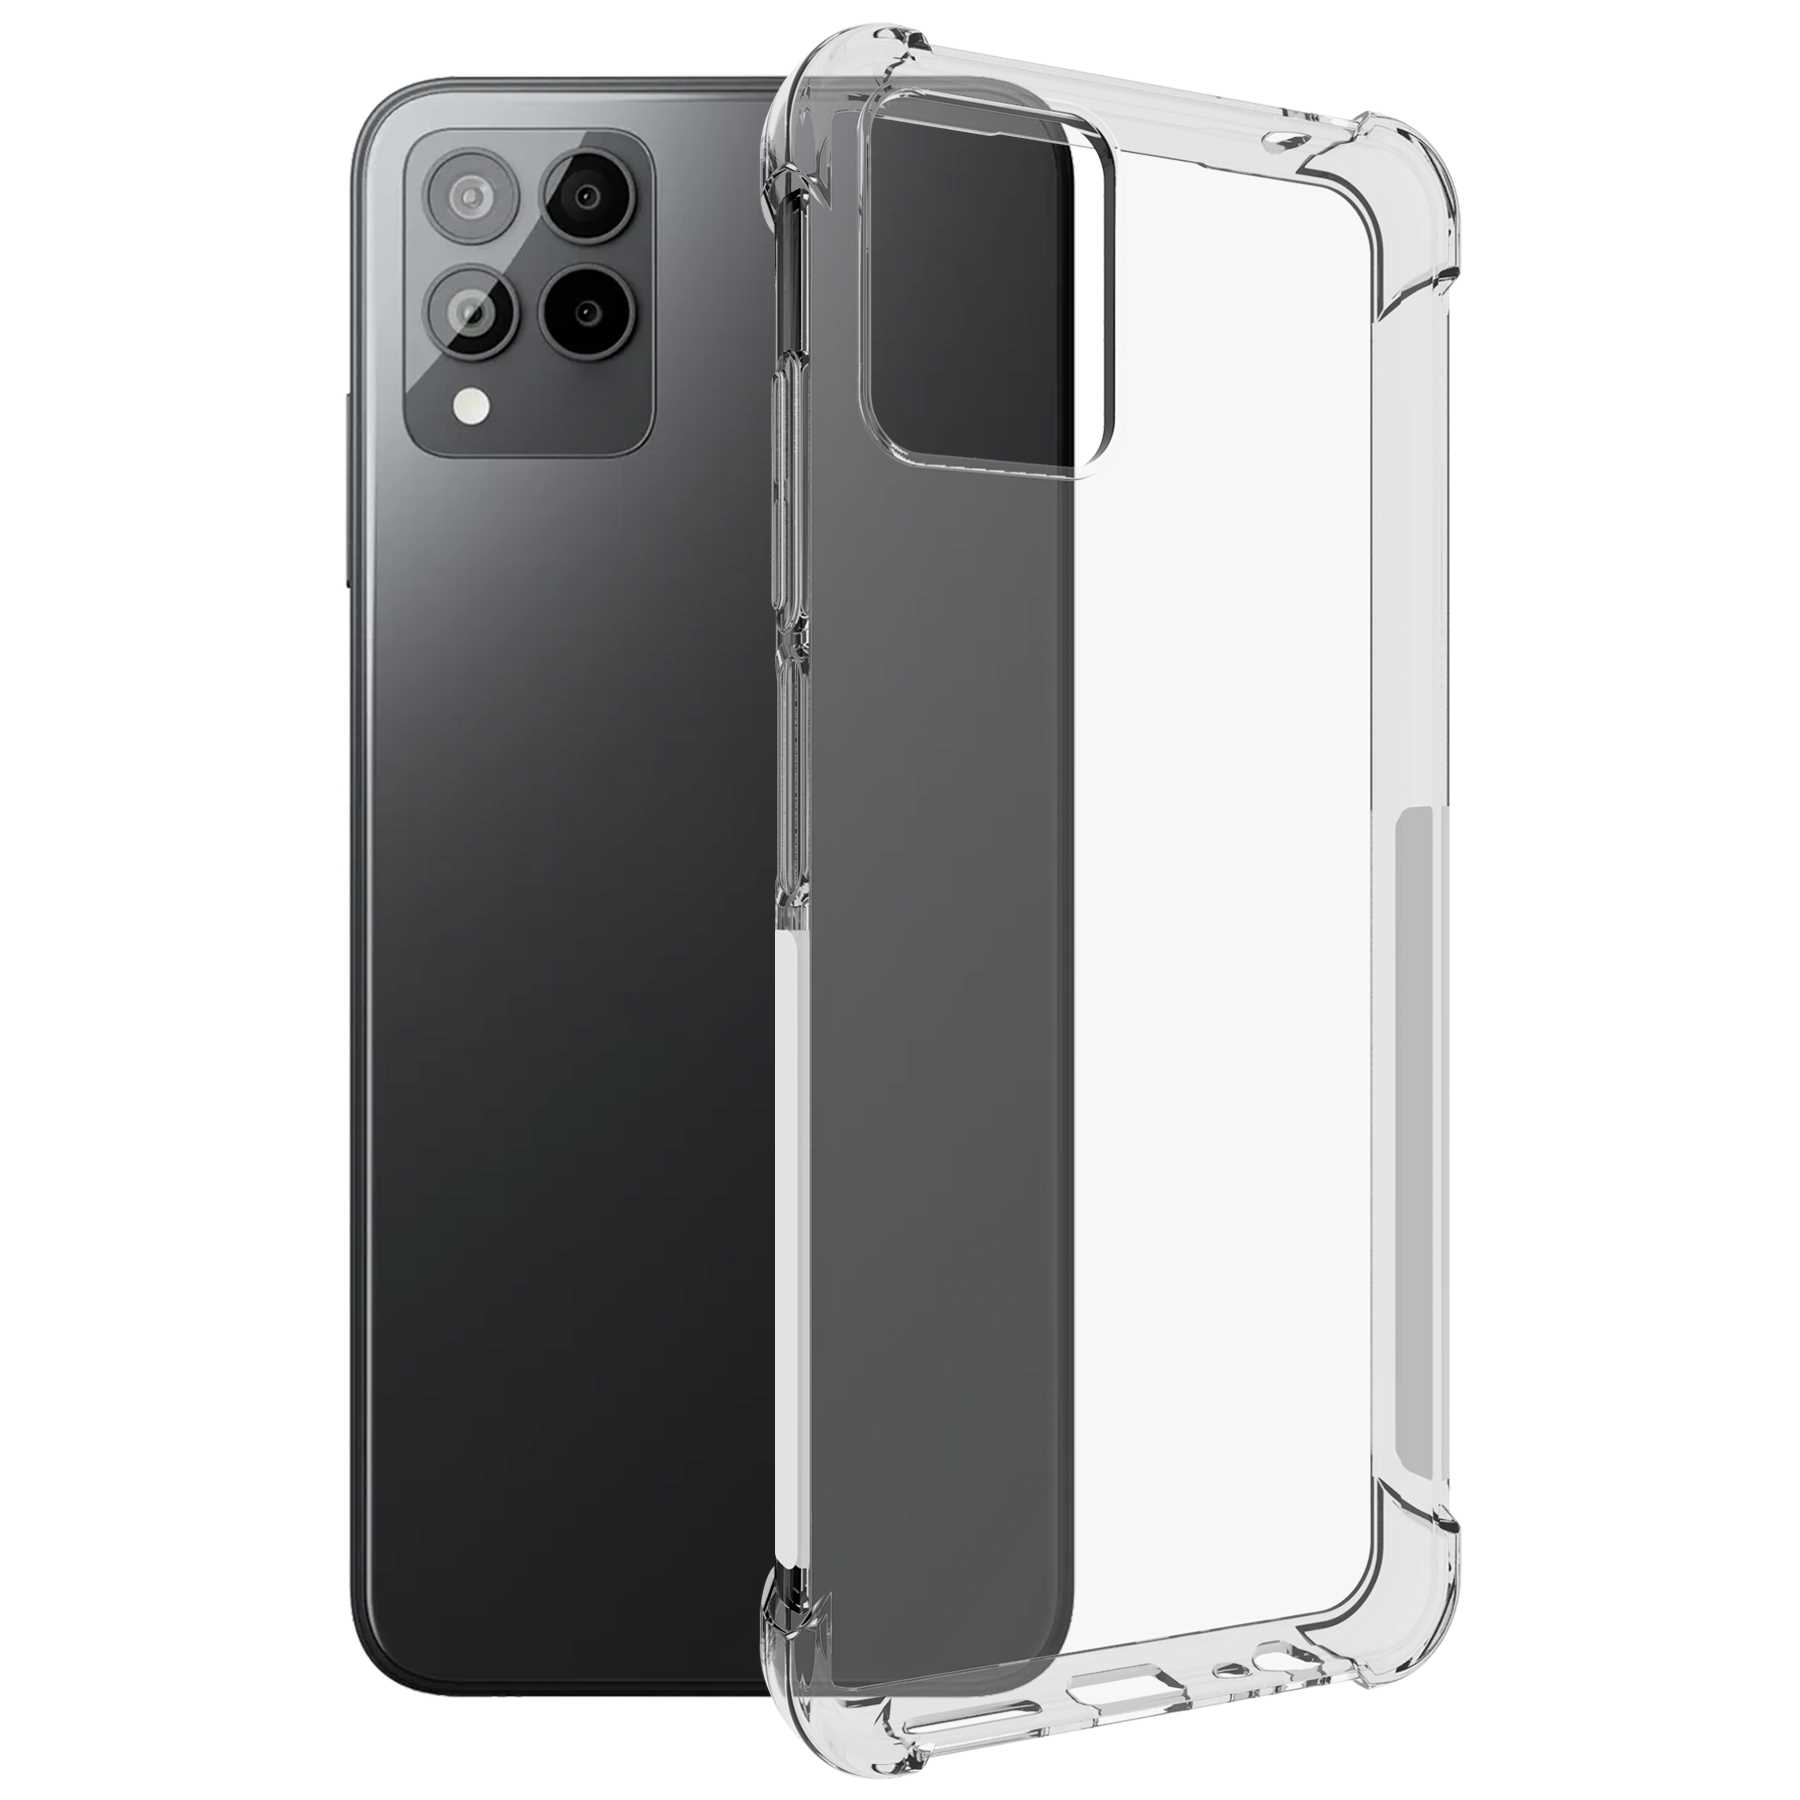 Telekom, MTB Armor Backcover, Case, Clear Transparent Pro, Phone MORE T ENERGY